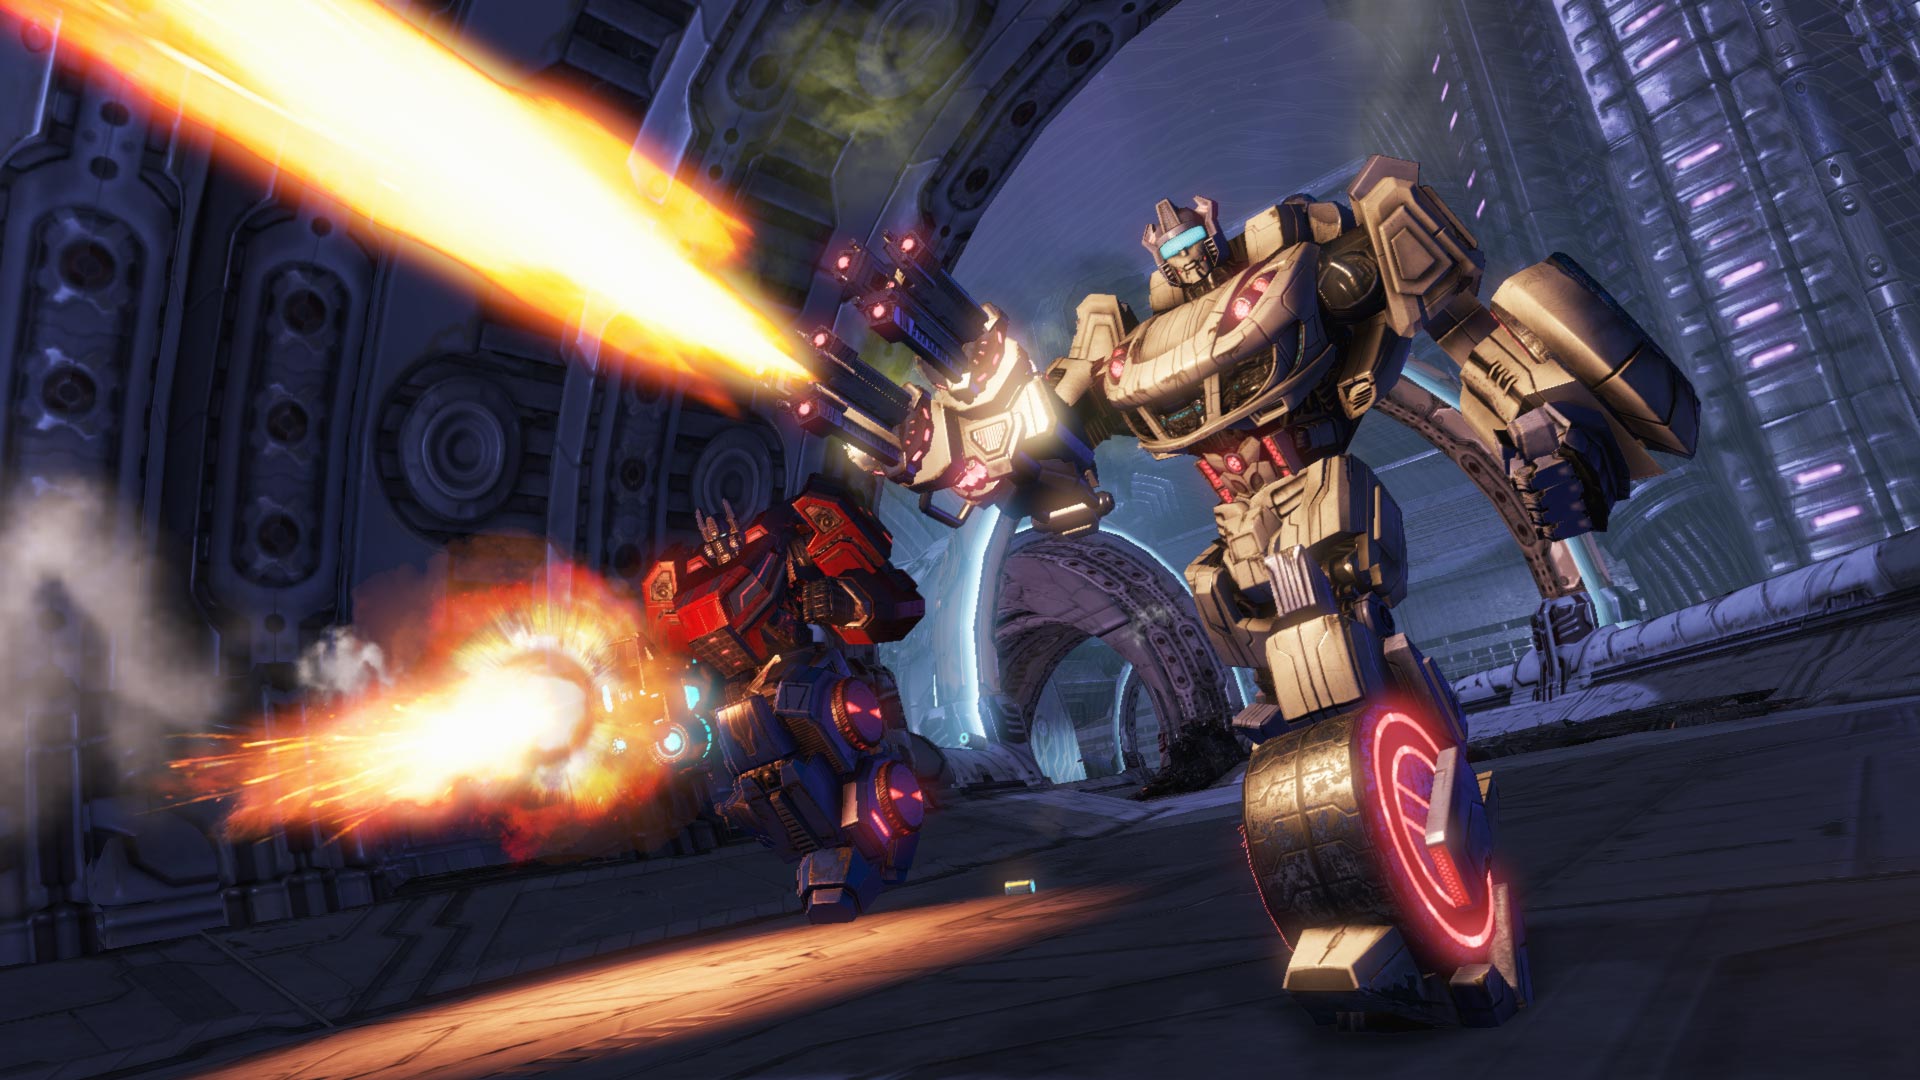 Transformers rise of the dark spark ps3 PS3 4